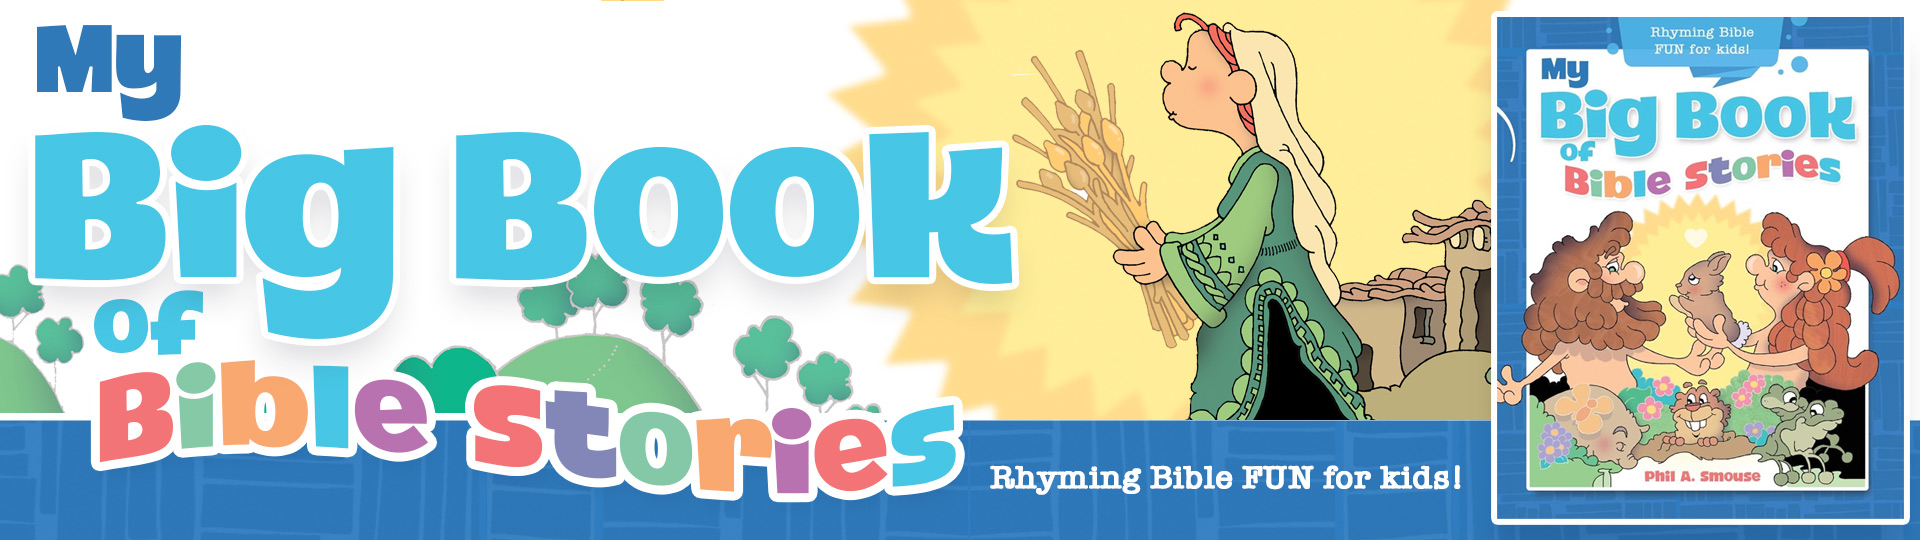 My Big Book of Bible Stories - Phil A. Smouse